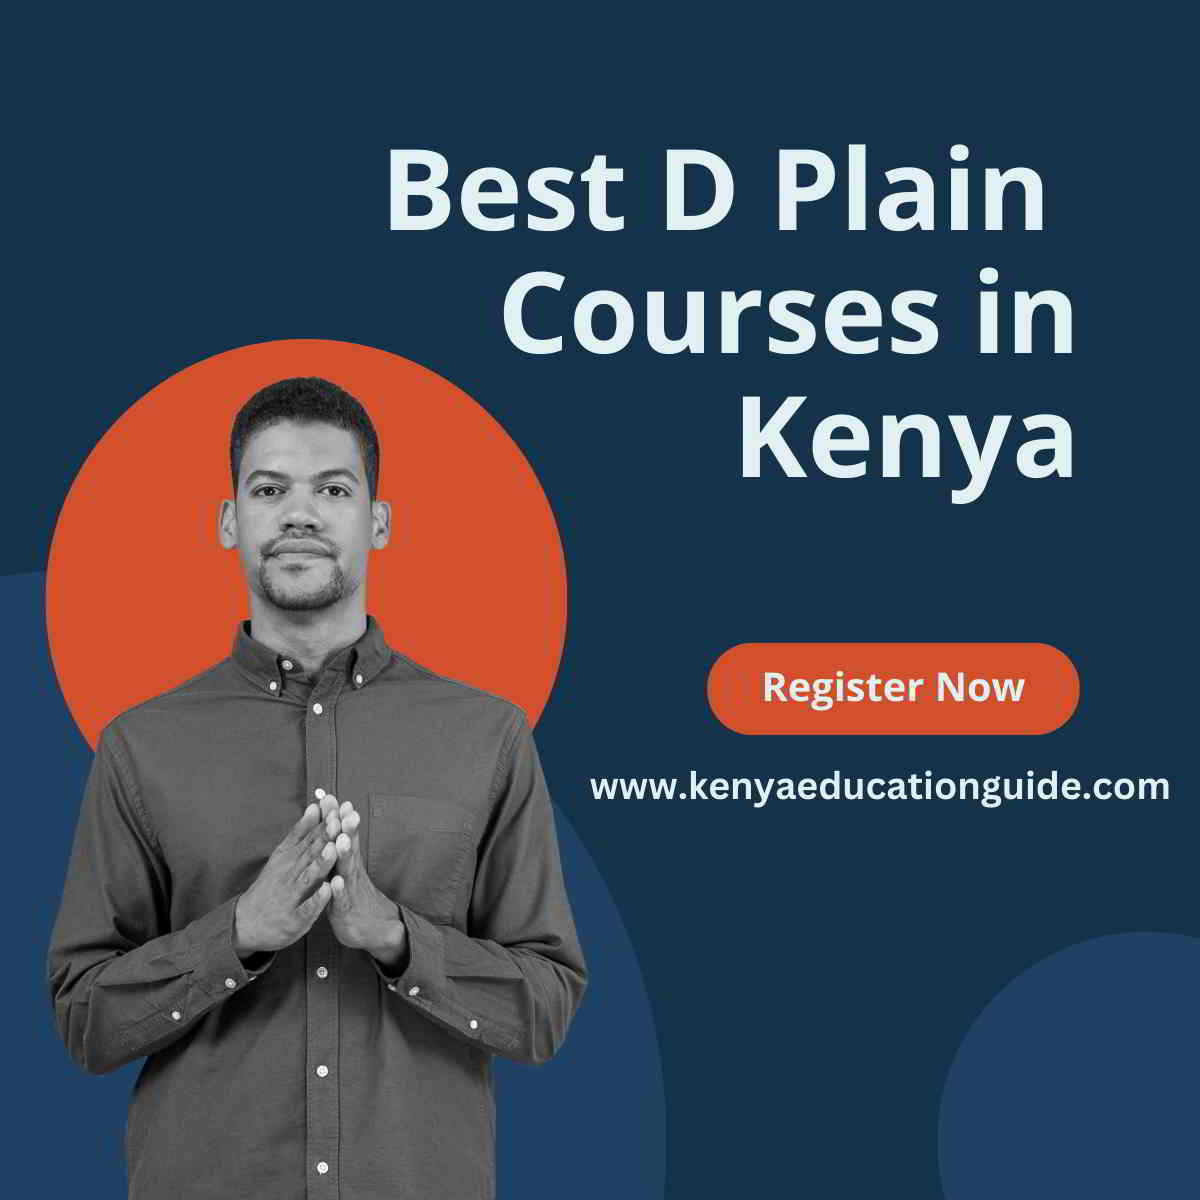 Courses to do with D plain in Kenya